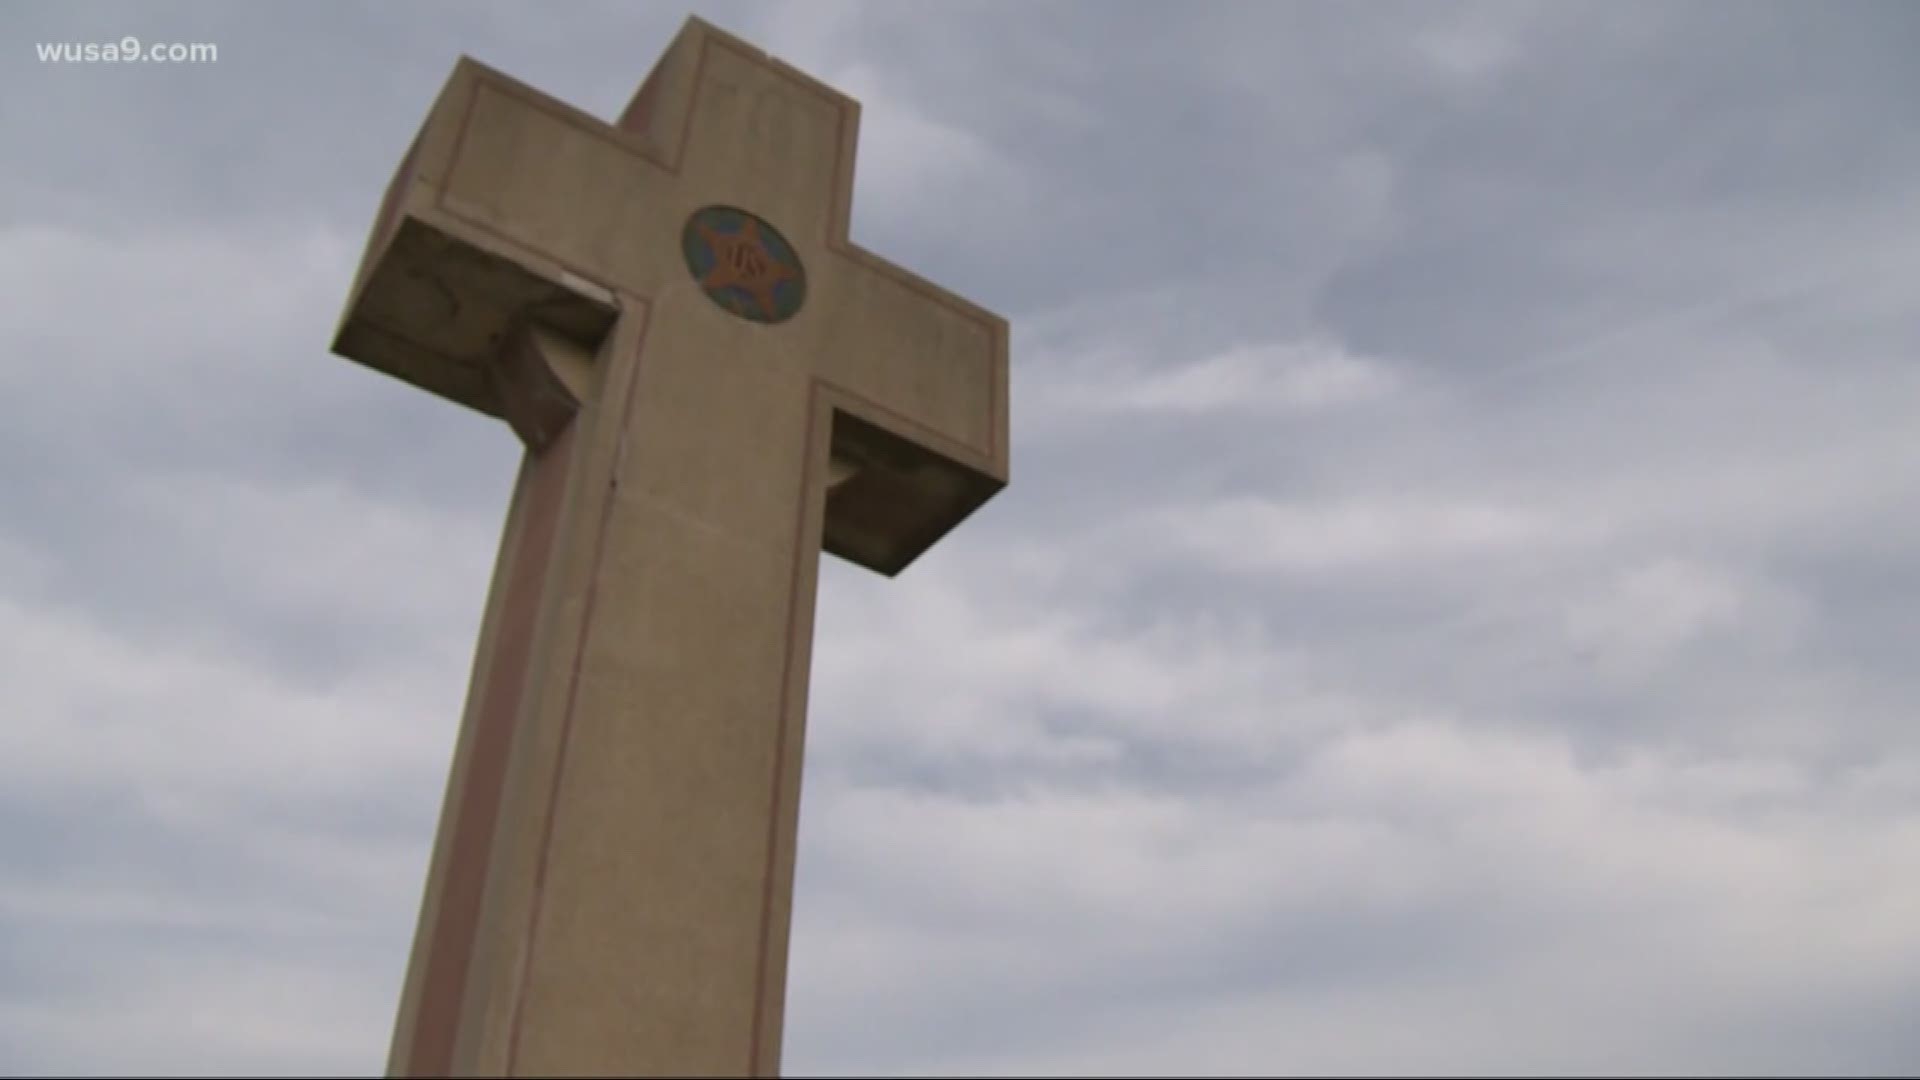 The Supreme Court says a World War I memorial in the shape of a 40-foot-tall cross can continue to stand on public land in Maryland.